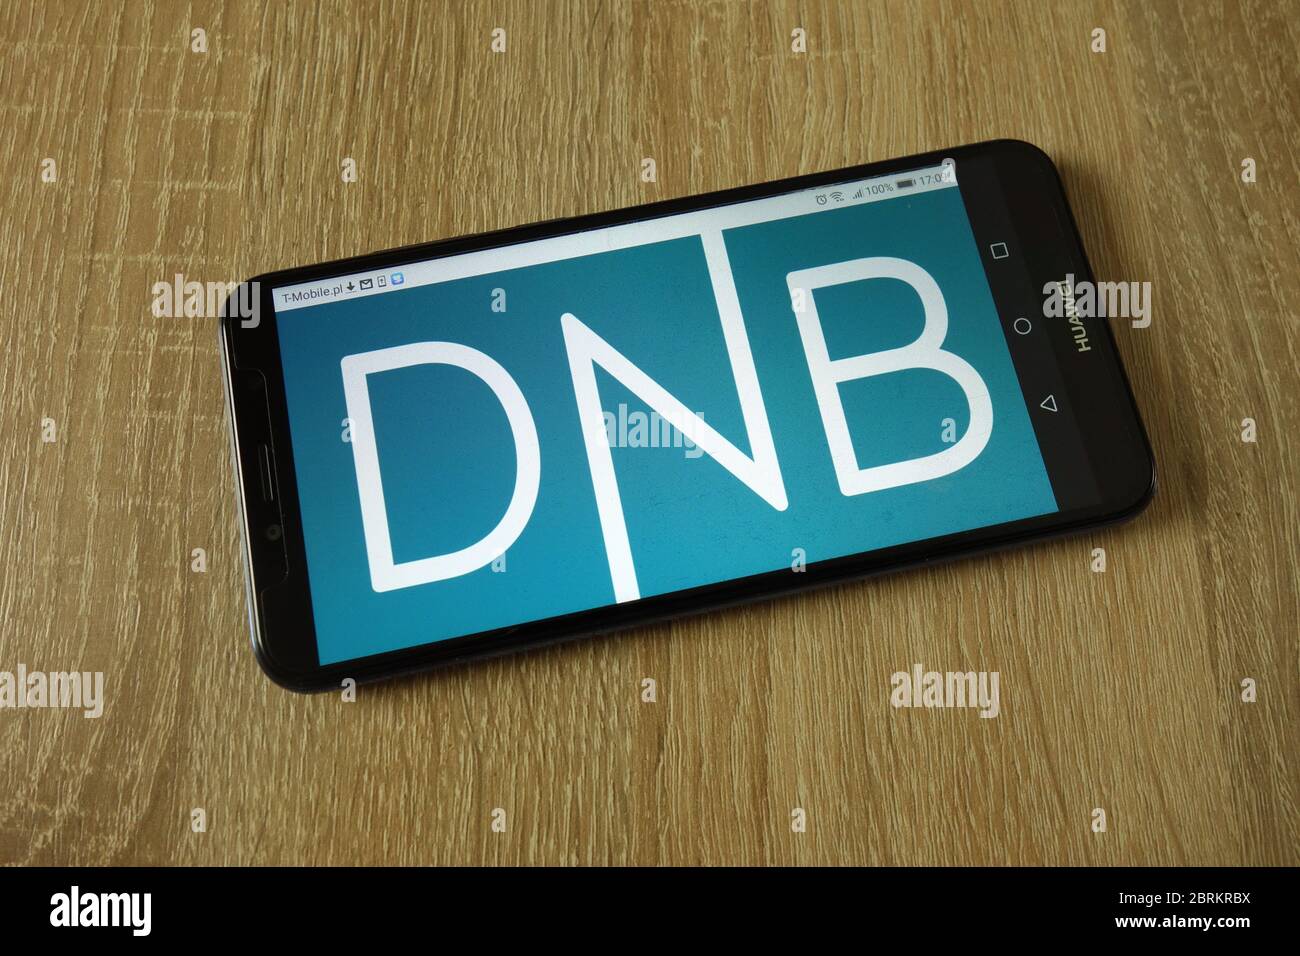 DNB ASA financial services group logo displayed on smartphone Stock Photo